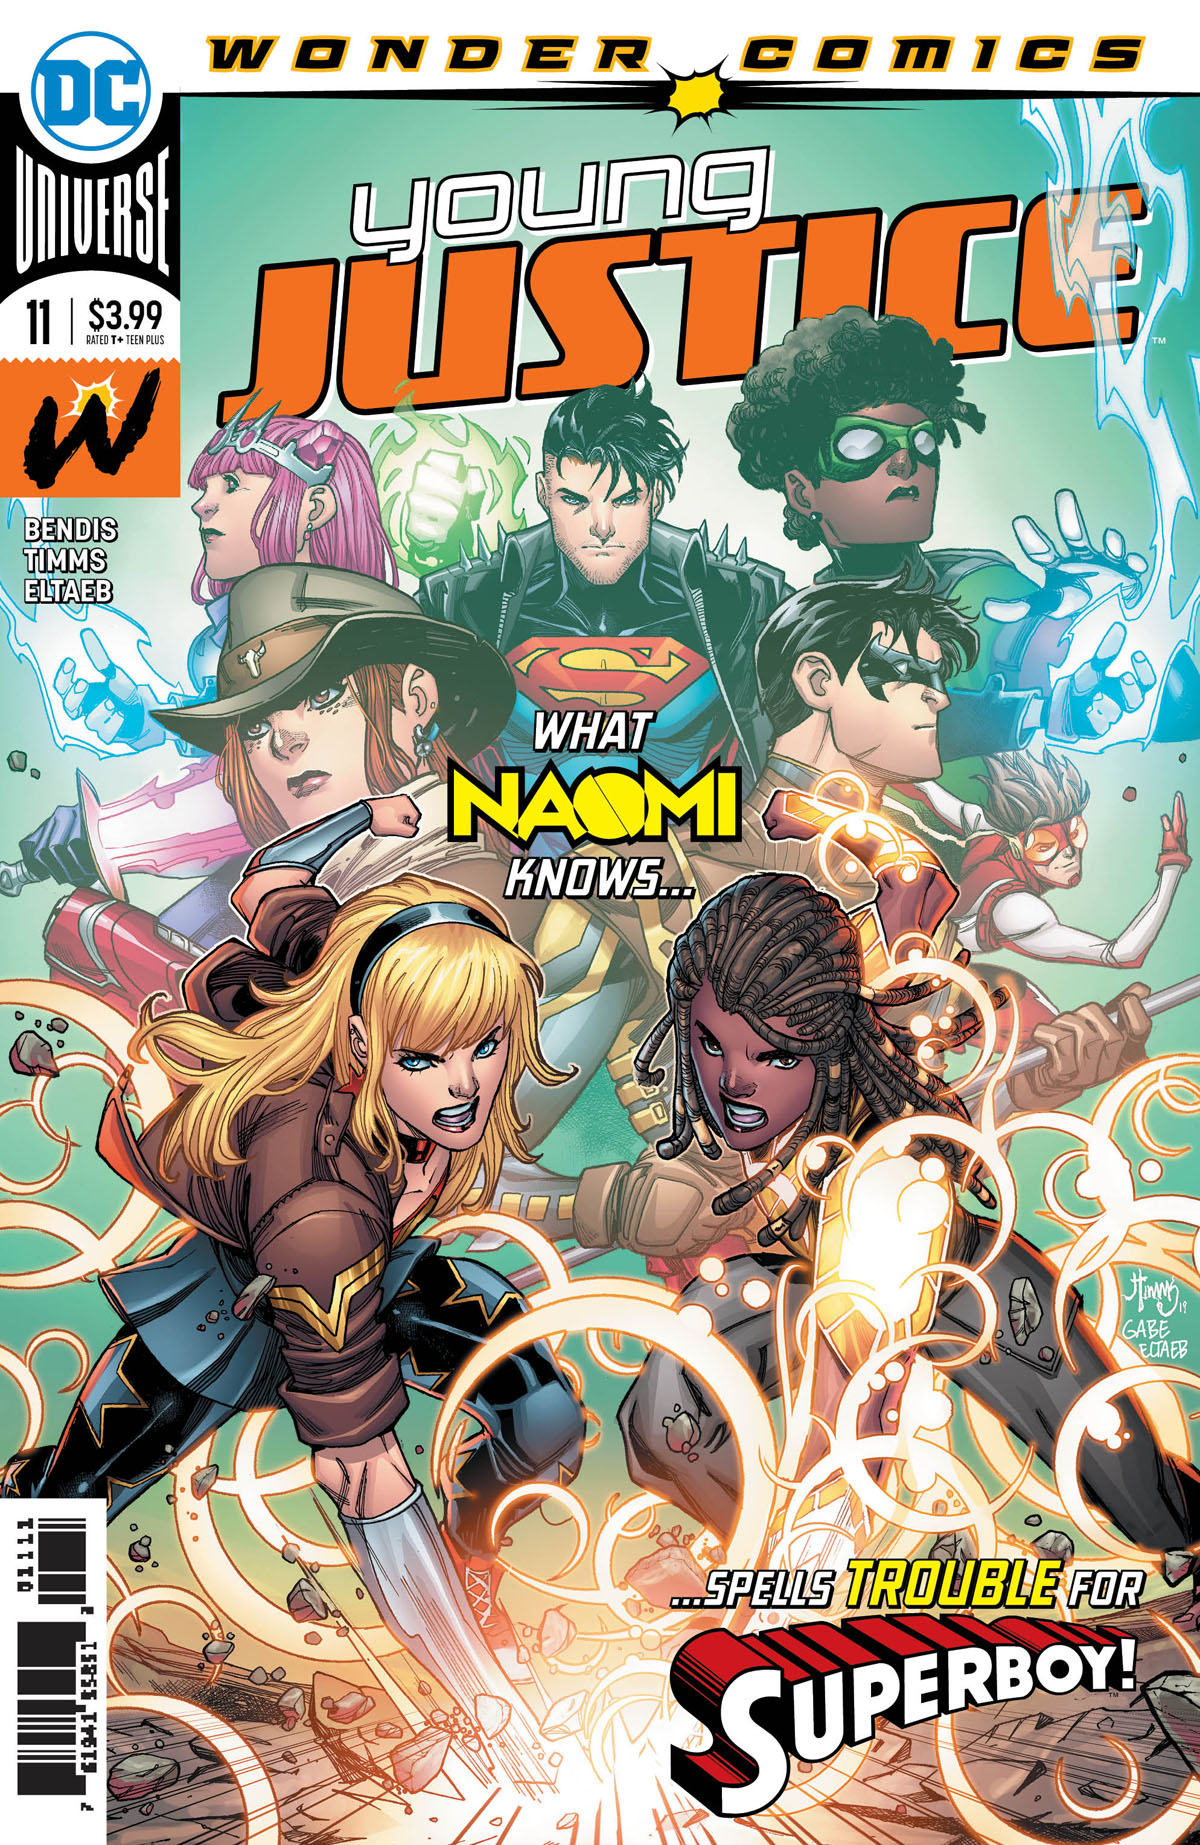 Young Justice #11 cover